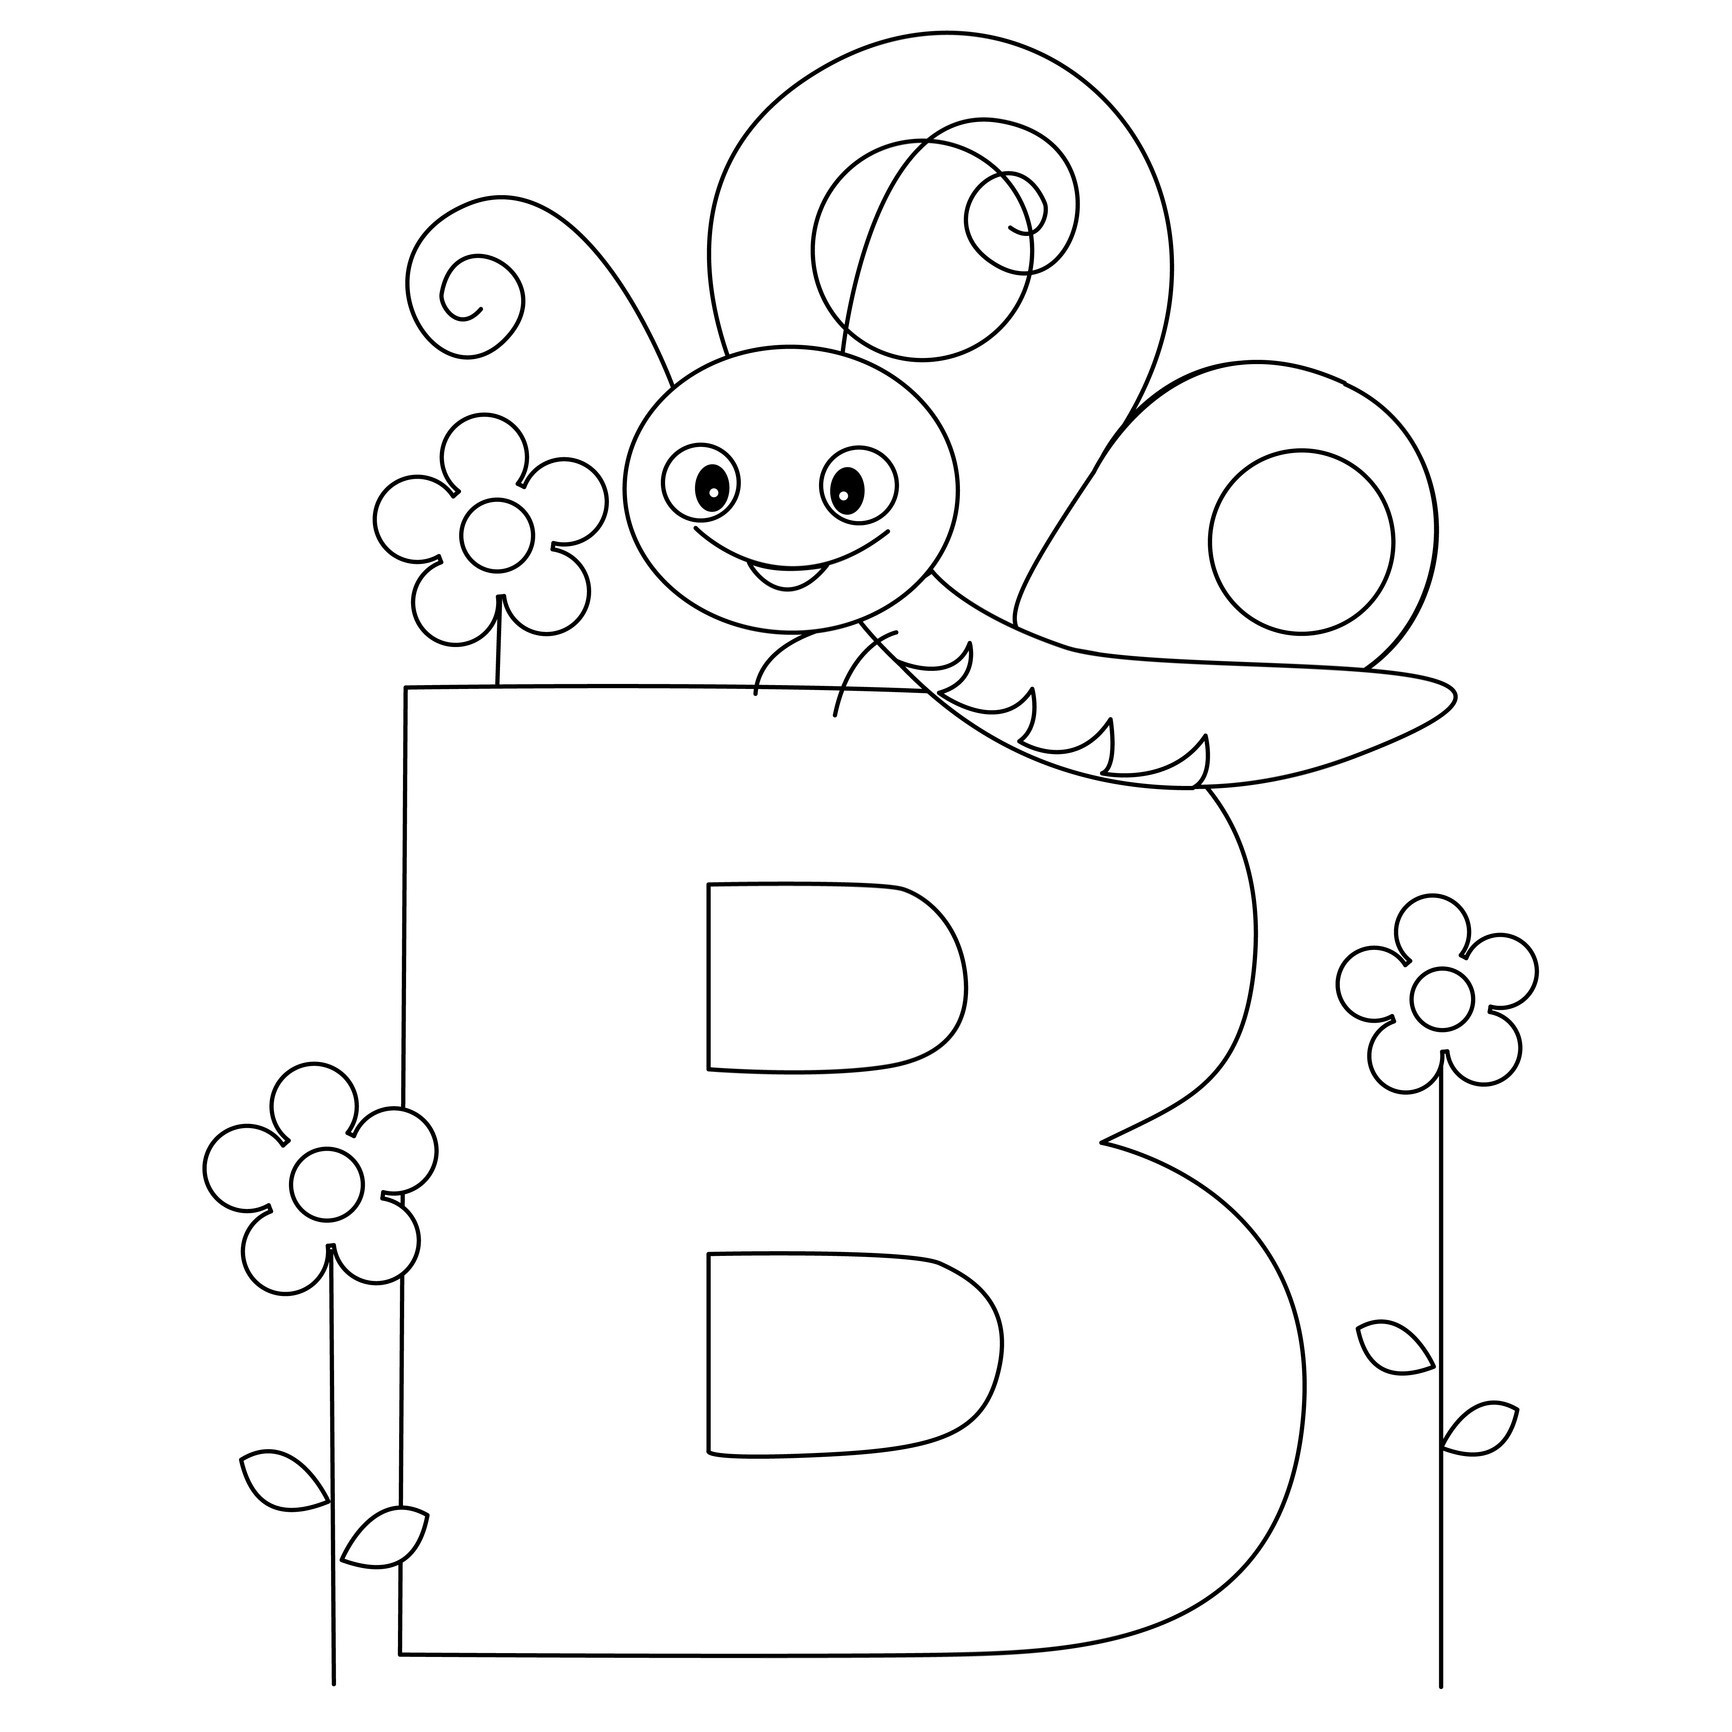 coloring-pages-ideas-alphabet-coloring-sheets-freerintable-free